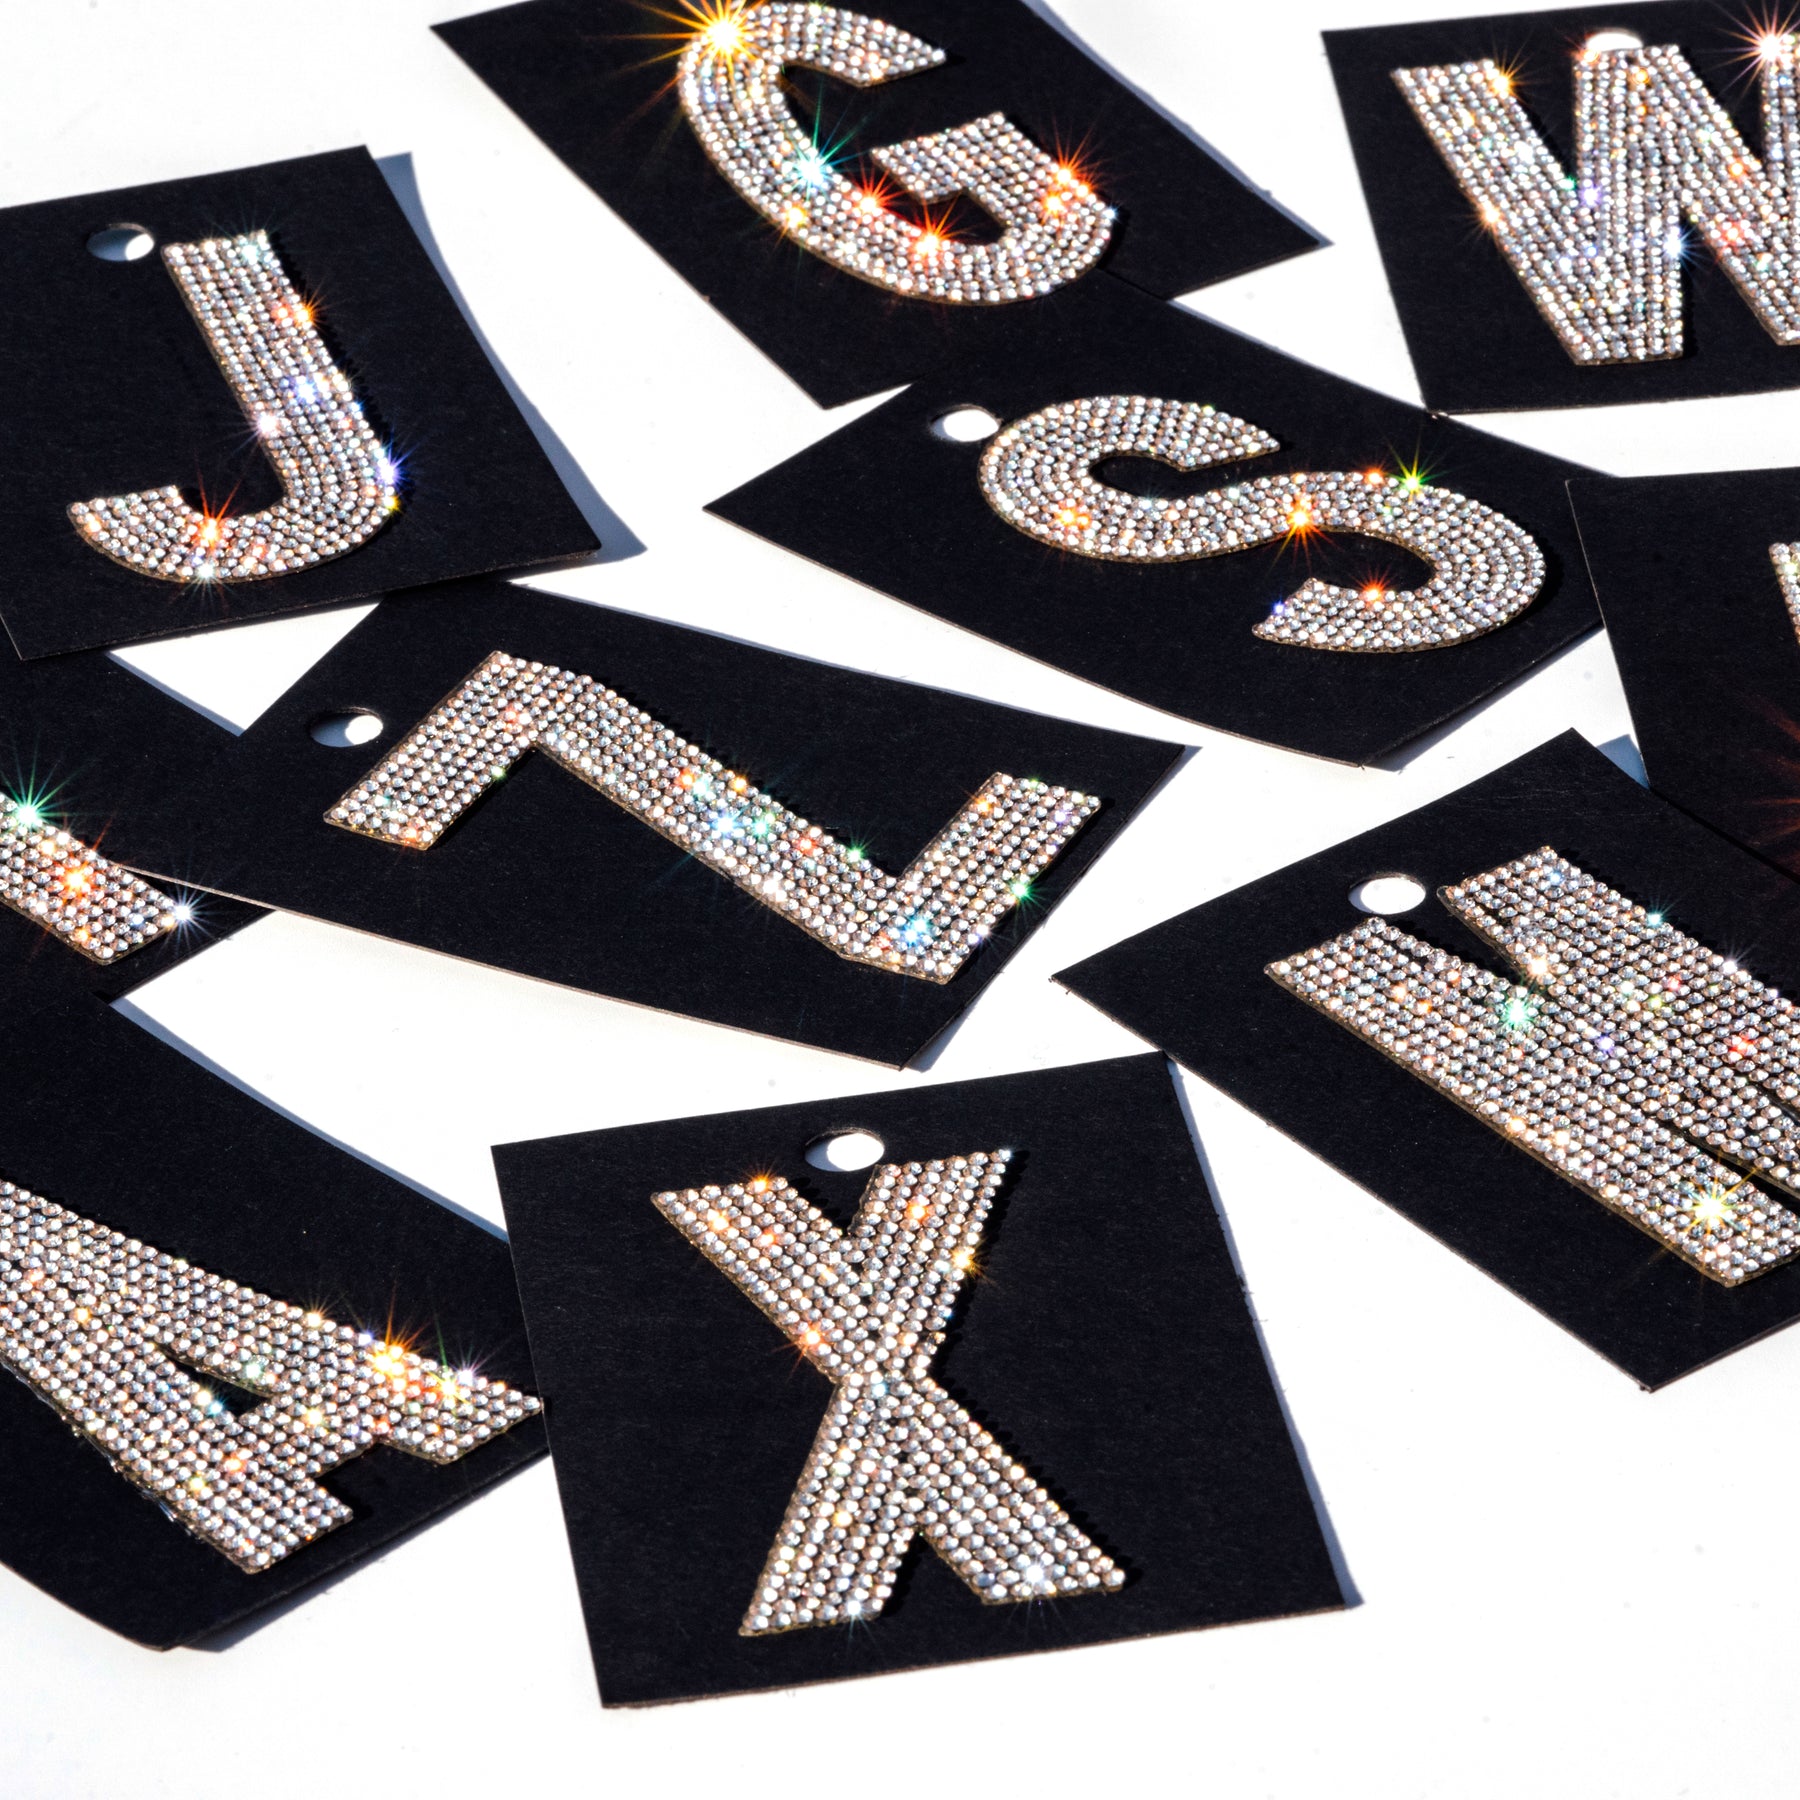 1, Rhinestone Letters, Hotfix Alphabet, Crystal Rhinestone Applique, Baby  headbands with letters, Garter with Name, Iron-On Letters, Wholesale